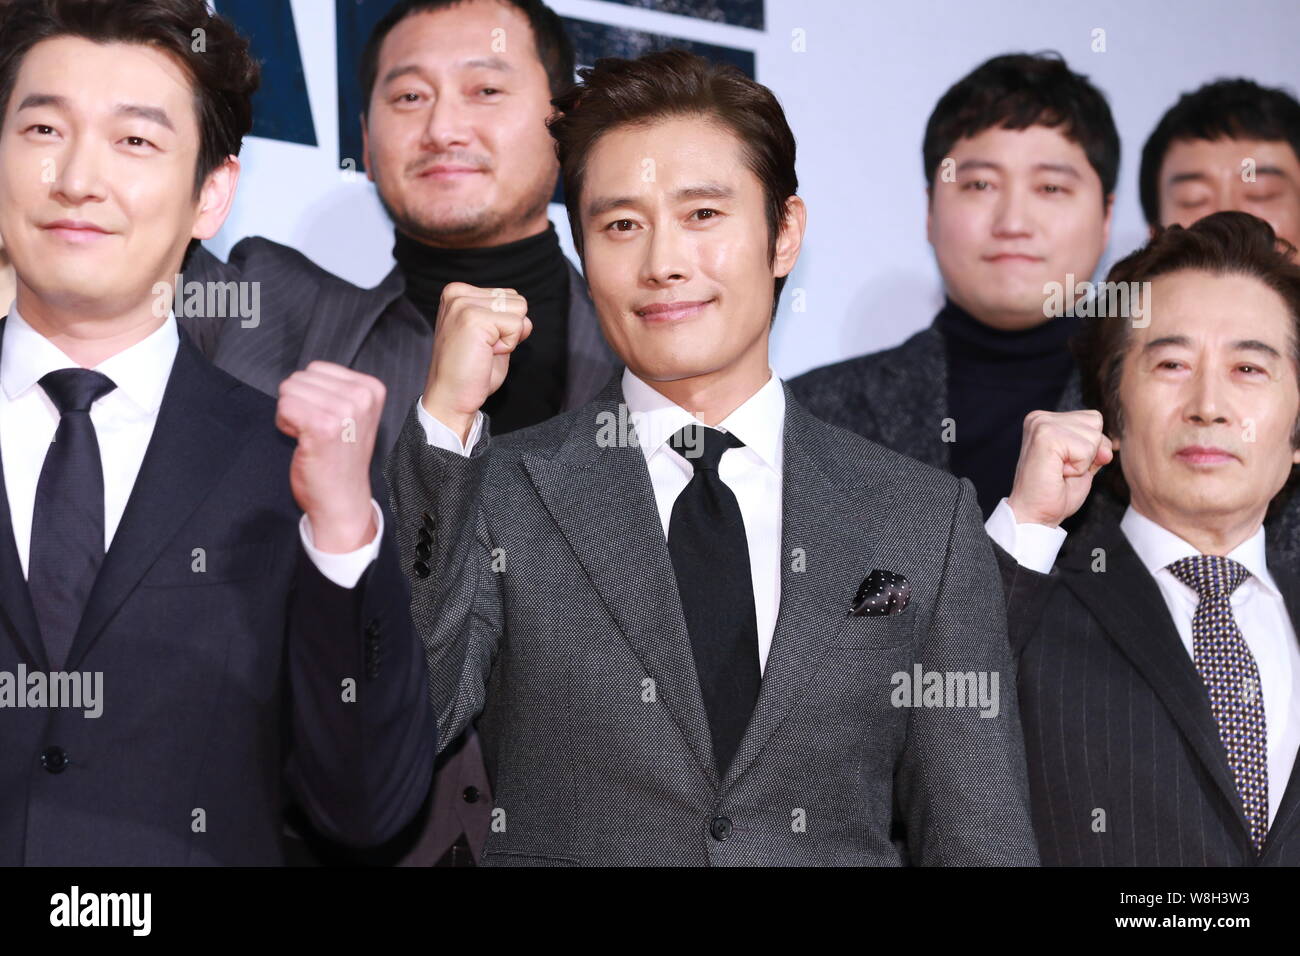 South Korean actors Cho Seung-woo, Lee Byung-hun and Baek Yoon-sik pose as they arrive for a VIP screening event of their new movie 'Inside Men' in Se Stock Photo